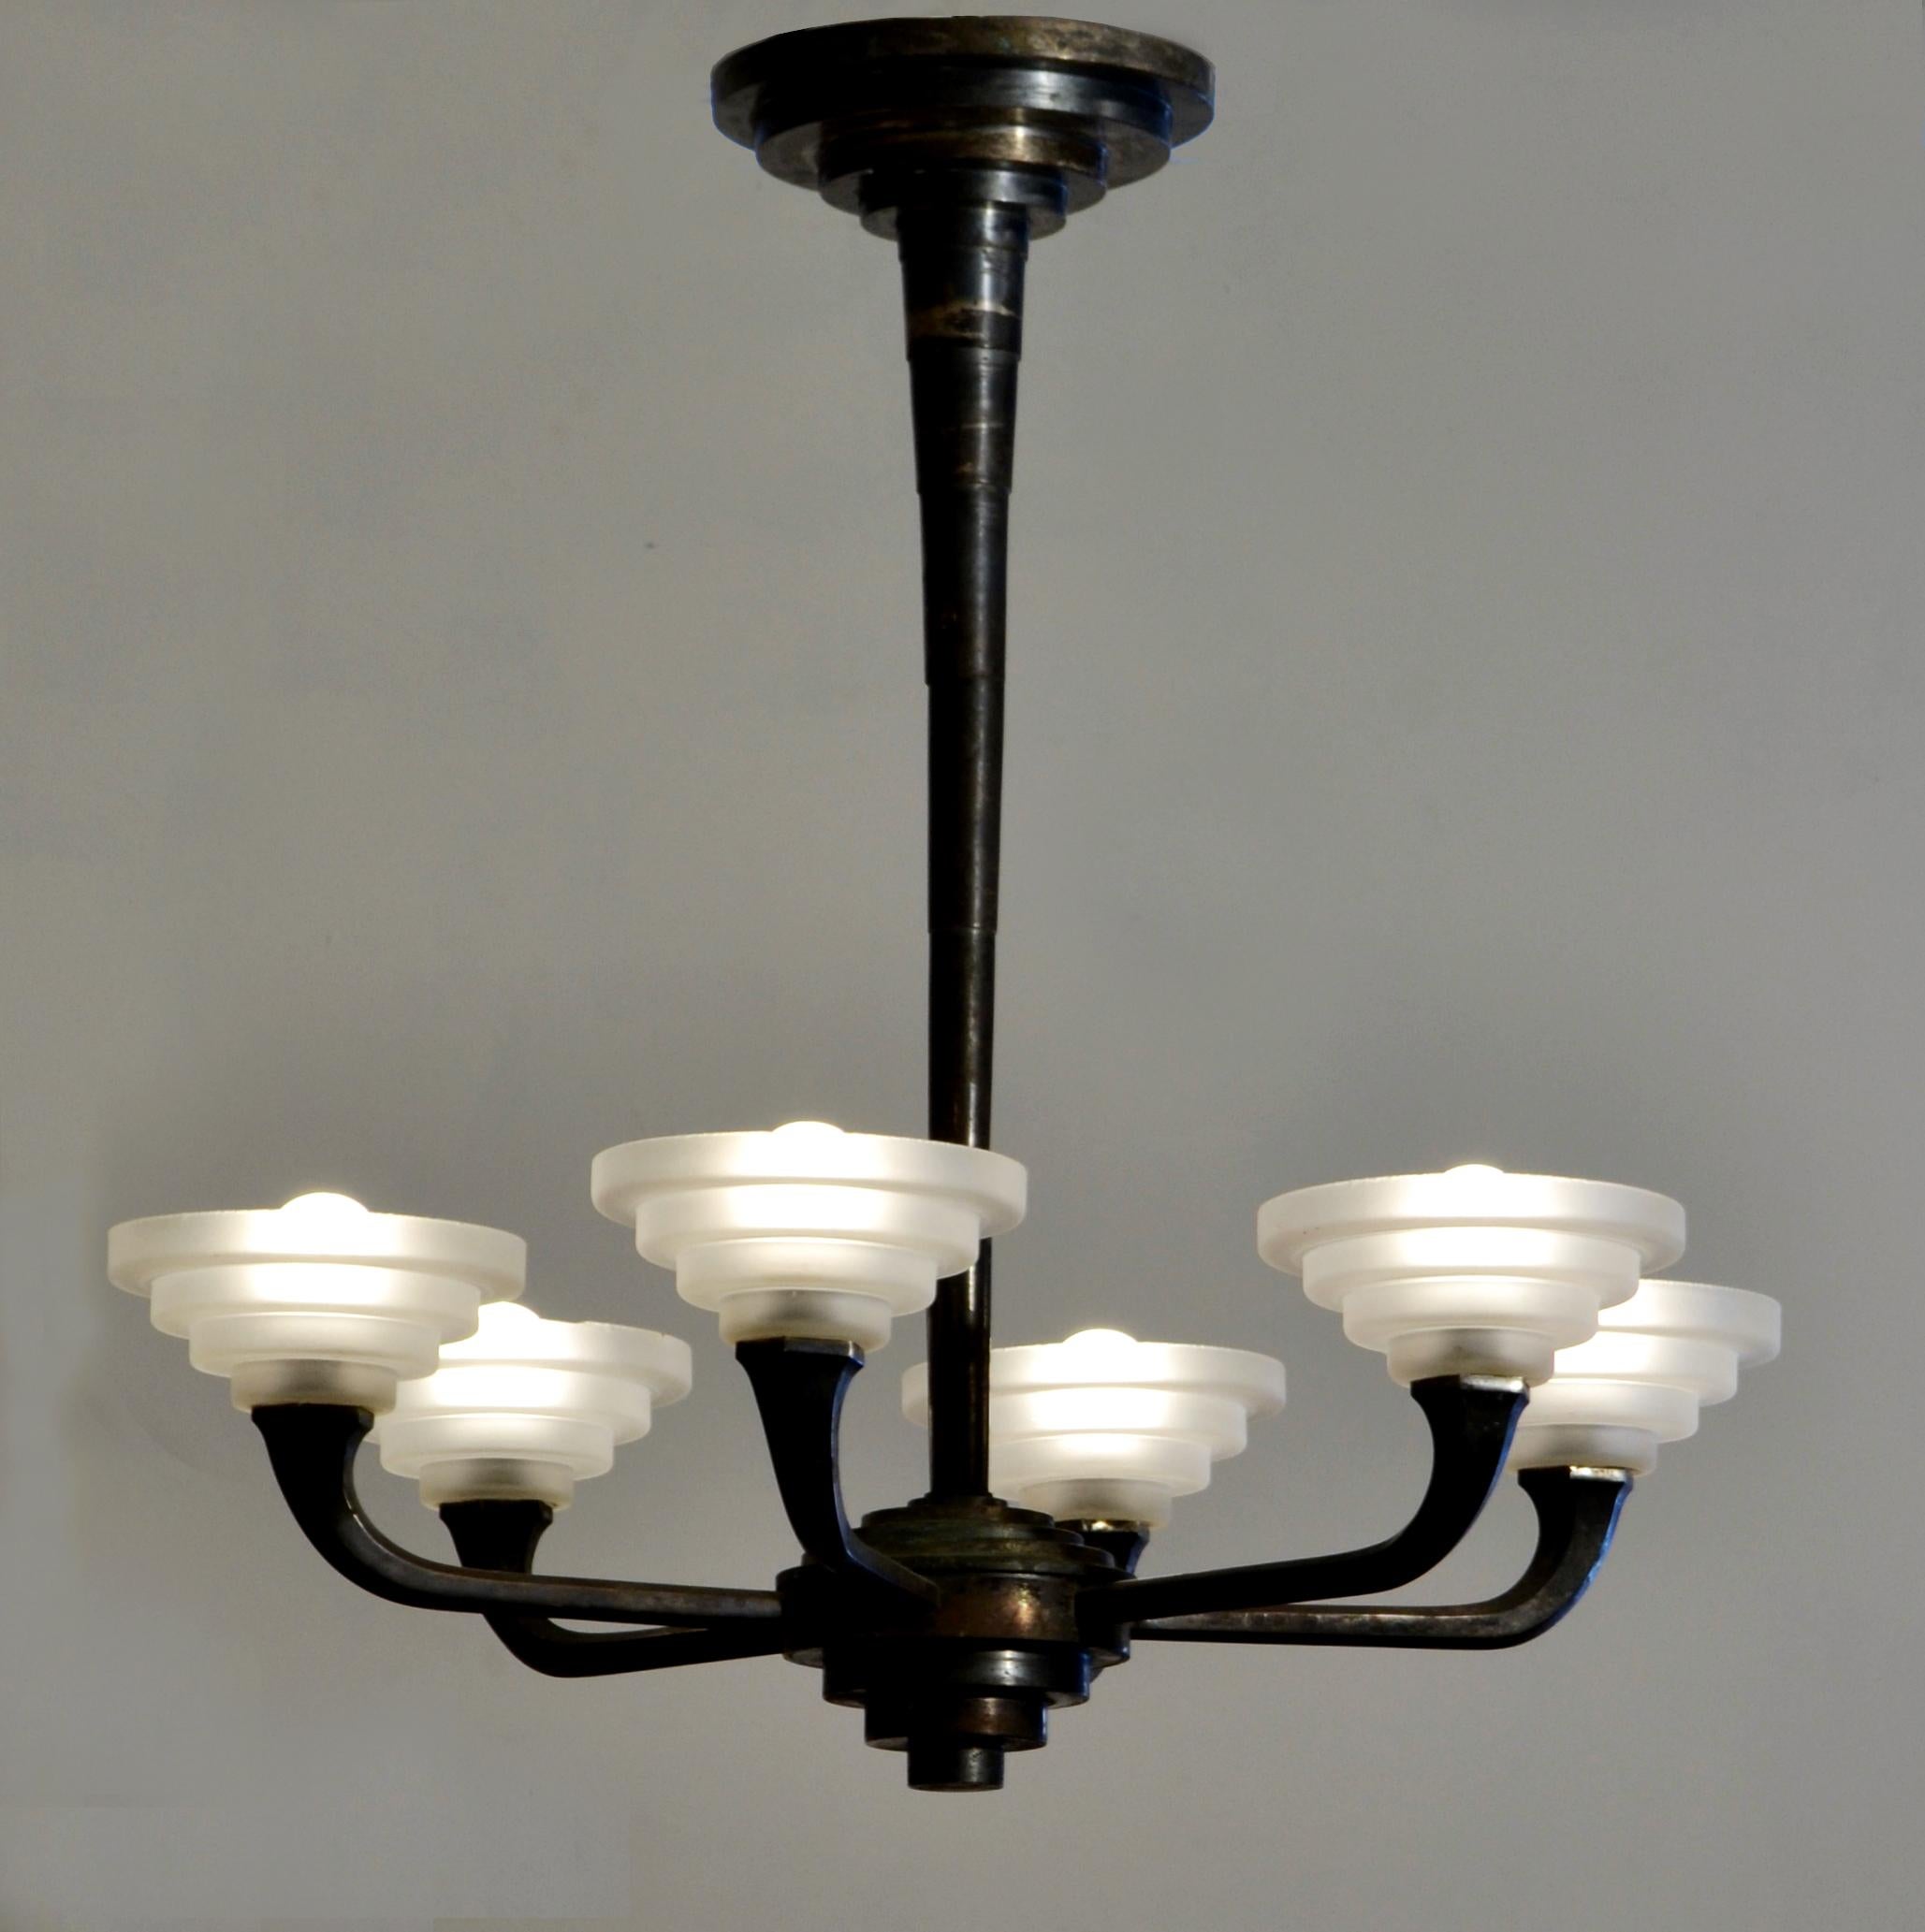 Geometric Modernist French uplighter chandelier has six arms, the frame is dark patinated silver plated in a stepped design. The 6 frosted glass shades follow the staggered design of the frame. This 1920s, French chandelier is a perfect example of